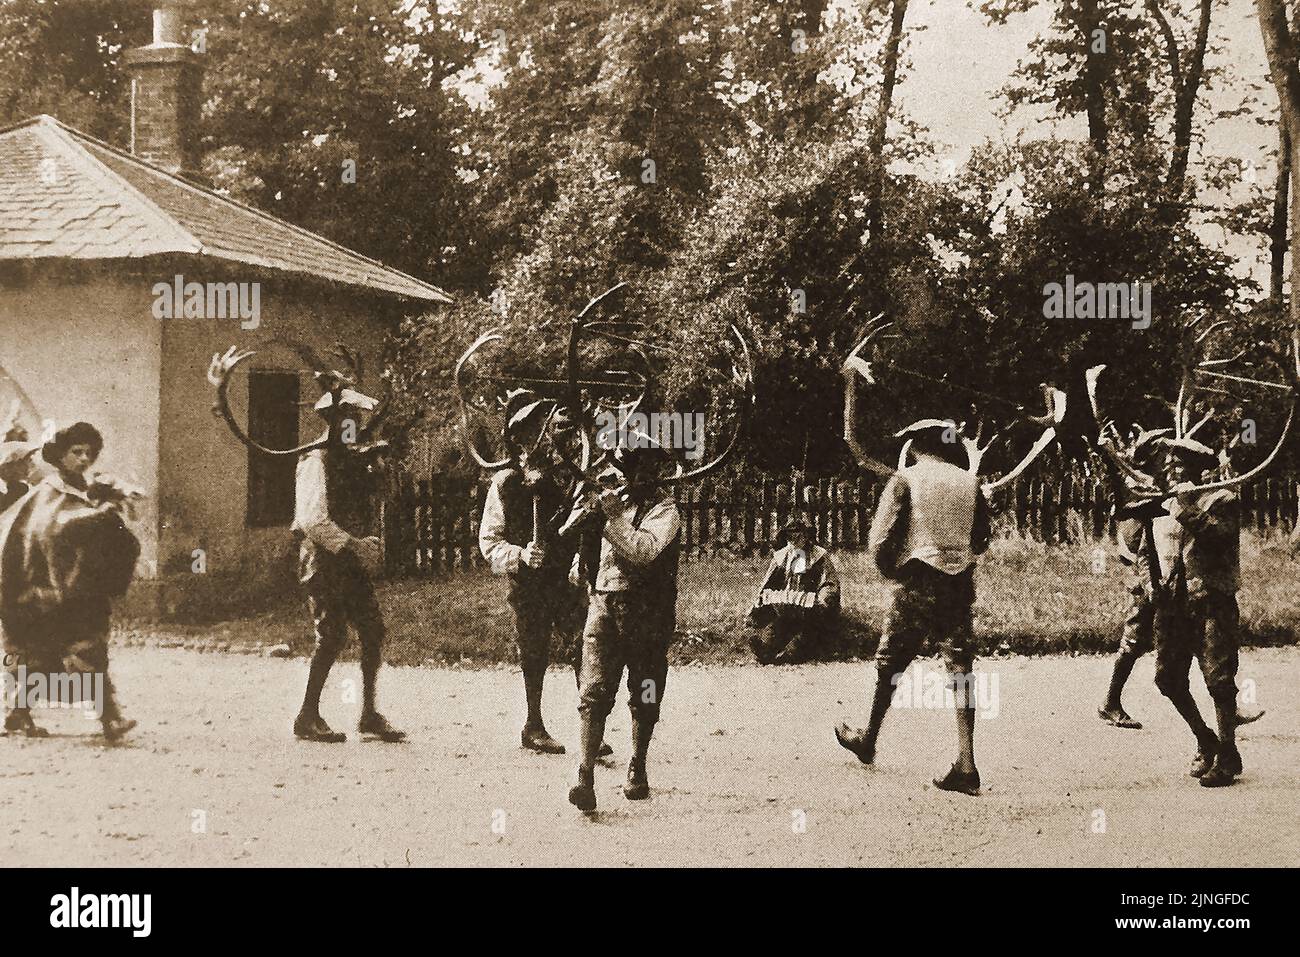 An historic newspaper photograph of Deermen (aka Deer Men) dancing the Horn Dance at Abbots Bromley, Staffordshire, England. The folk dance dates back to medieval times, though like some Morris dancing, the dance can now involve a hobby horse, Maid Marian, and a Fool. Though historical  records of the ceremony are relatively scarce,  carbon dating of the antlers used in the ceremony  date to the ceremonial aspect to the 11th century. The ceremony usually takes place on the first Sunday after 4 September. (known as Wakes Sunday) after a blessing at st Nicholas' church. Stock Photo